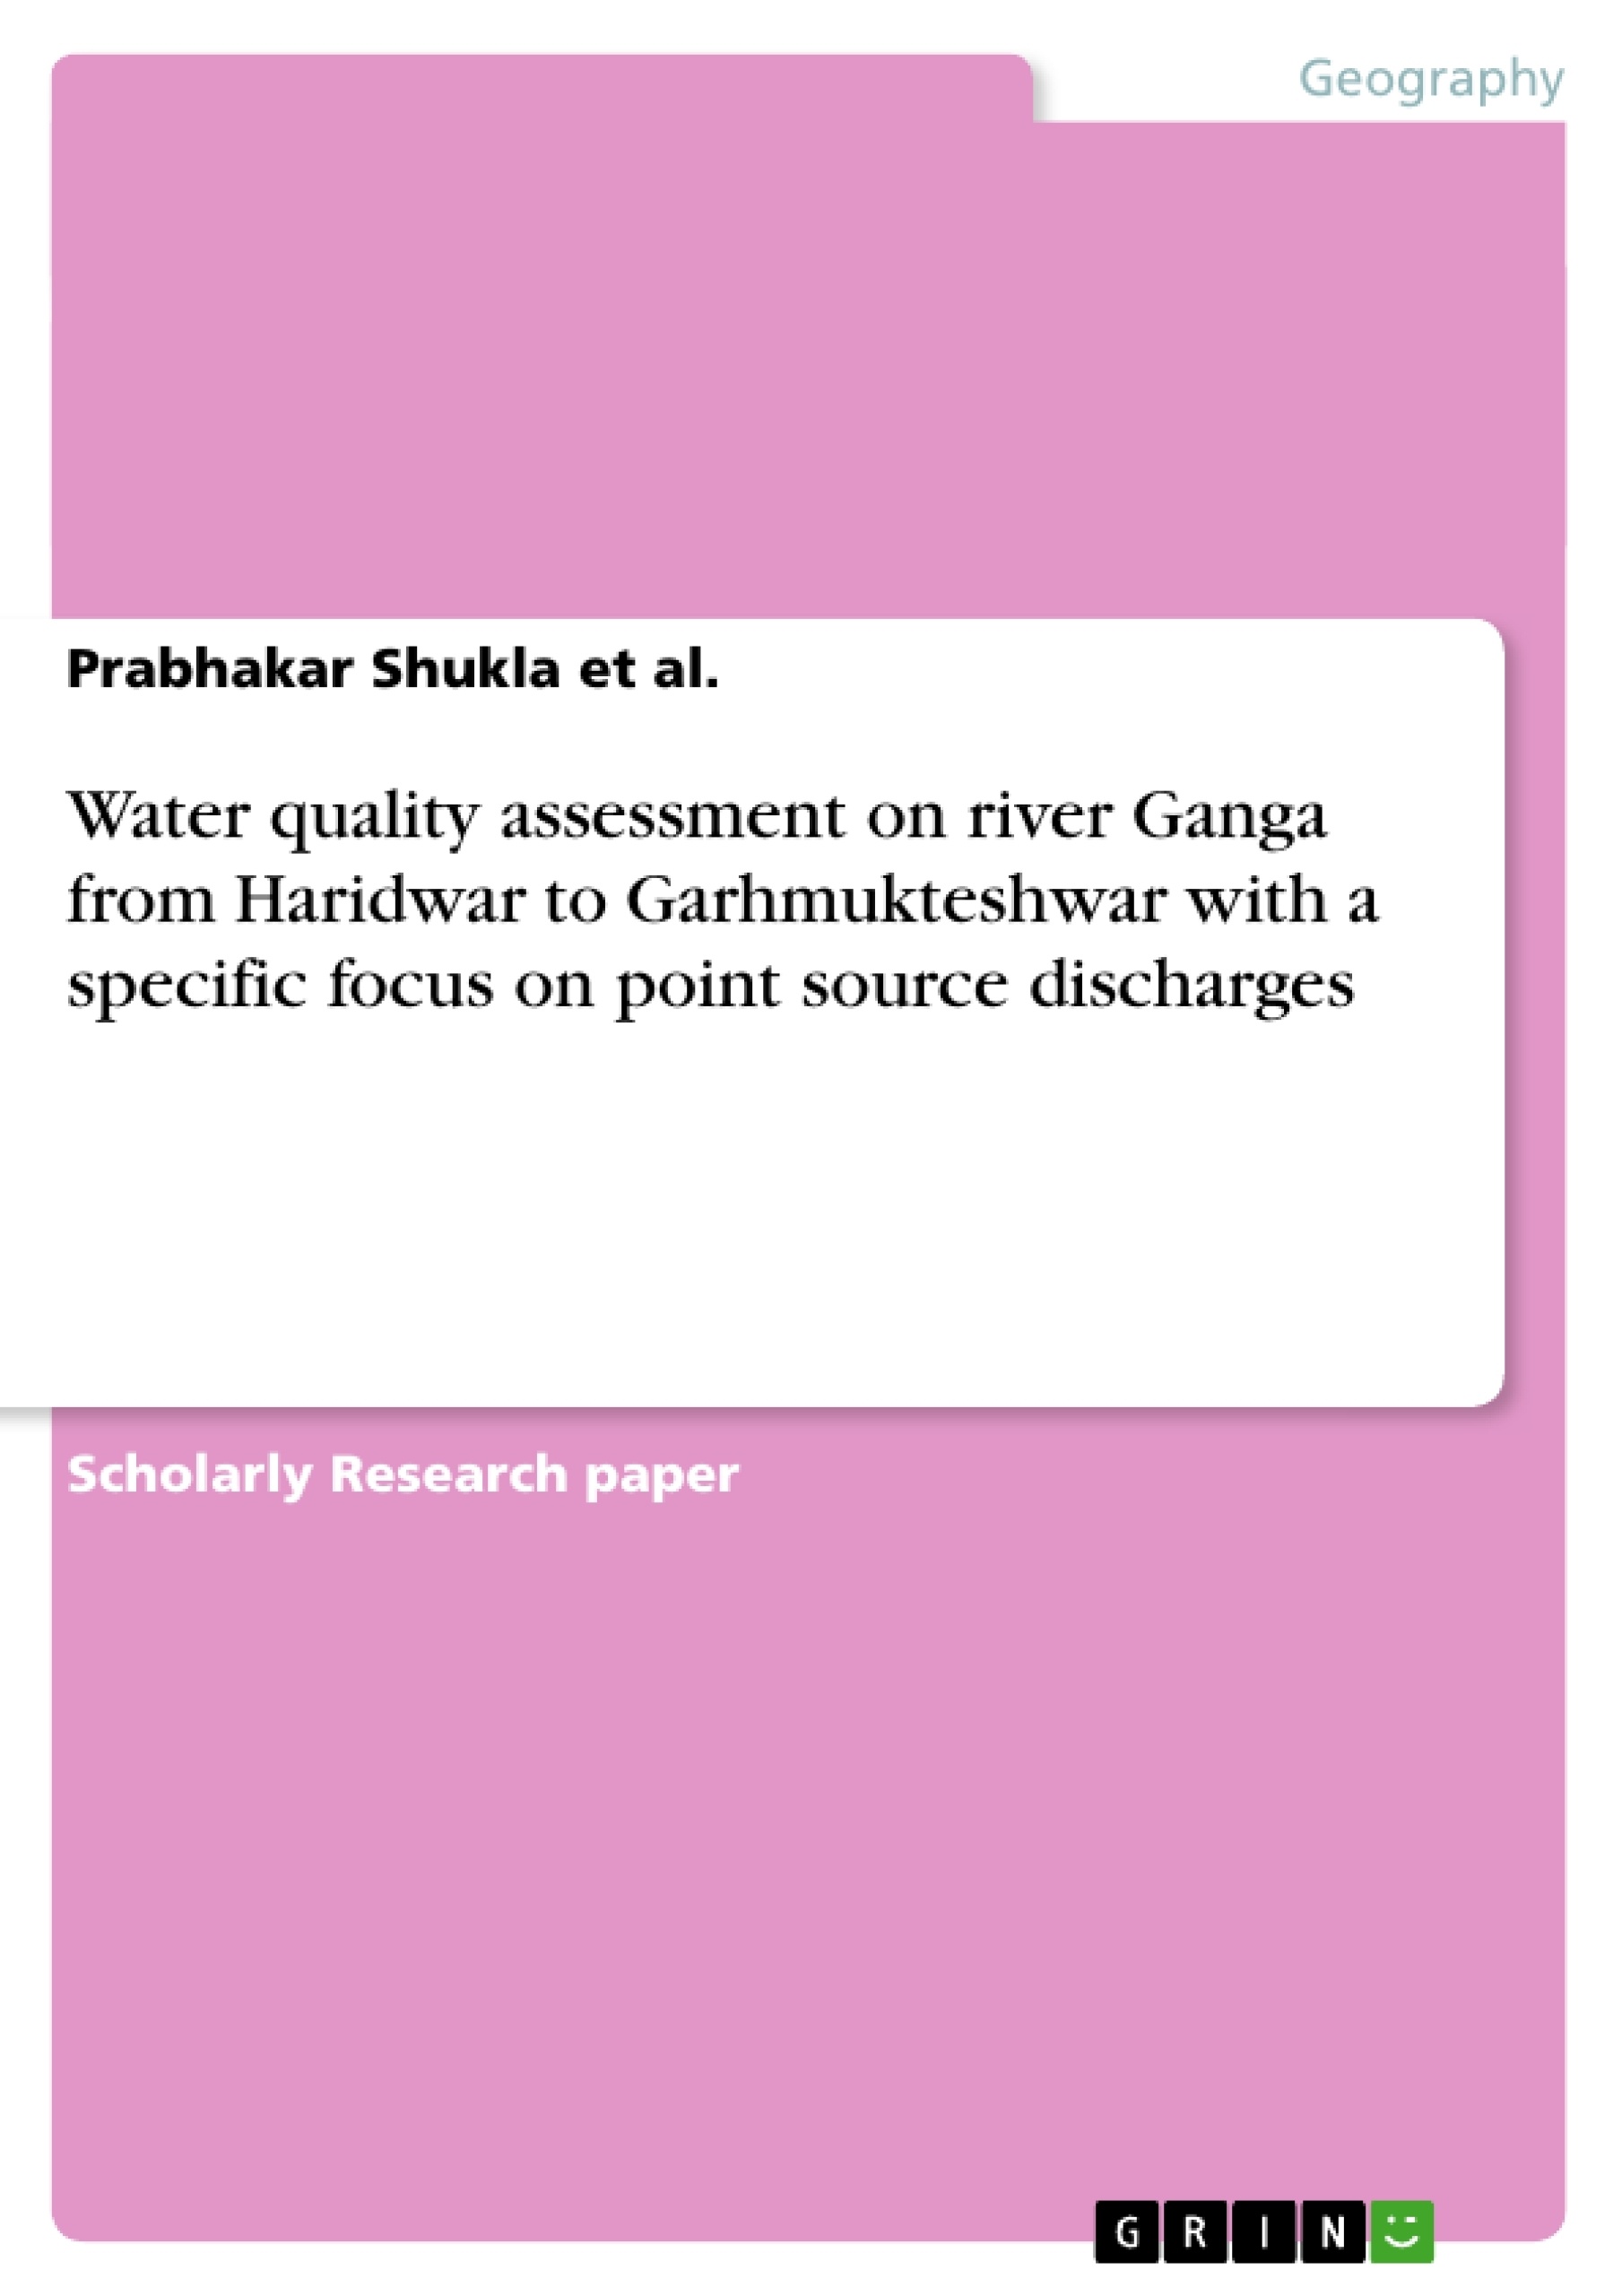 Titel: Water quality assessment on river Ganga from Haridwar to Garhmukteshwar with a specific focus on point source discharges